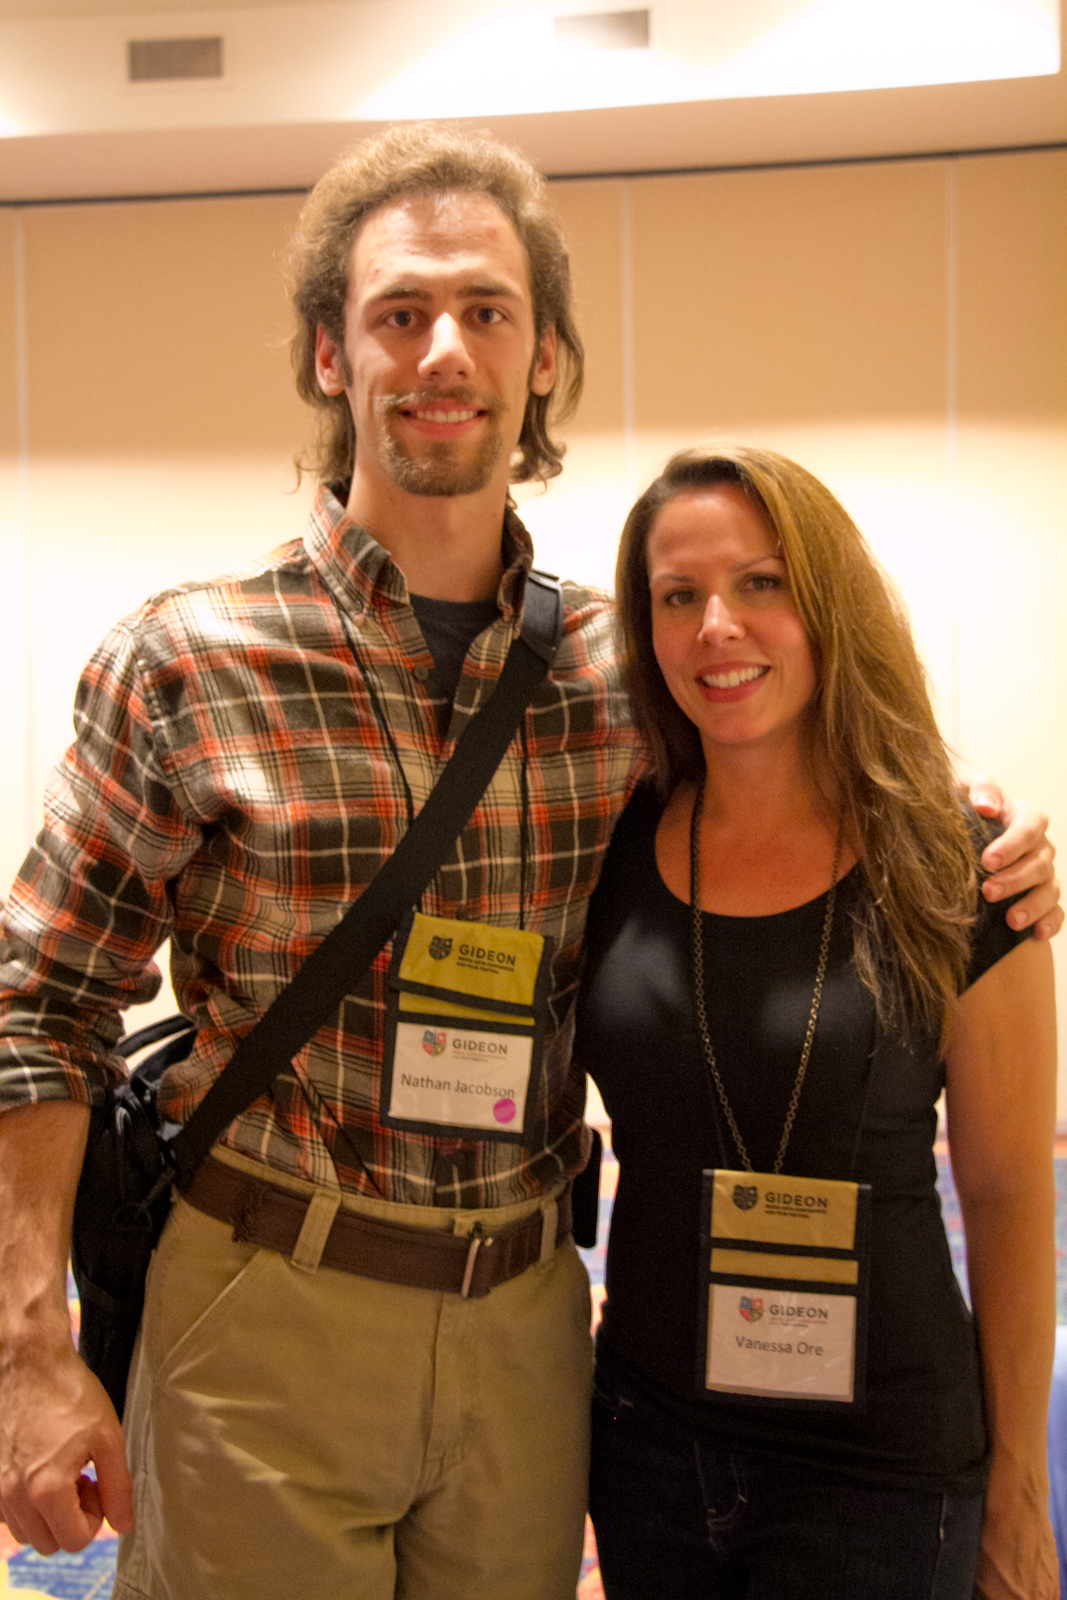 Nathan Jacobson with actress/producer Vanessa Ore (Virtuous, My Name Is Paul) at the 2014 Gideon Media Arts Conference & Film Festival in Orlando.